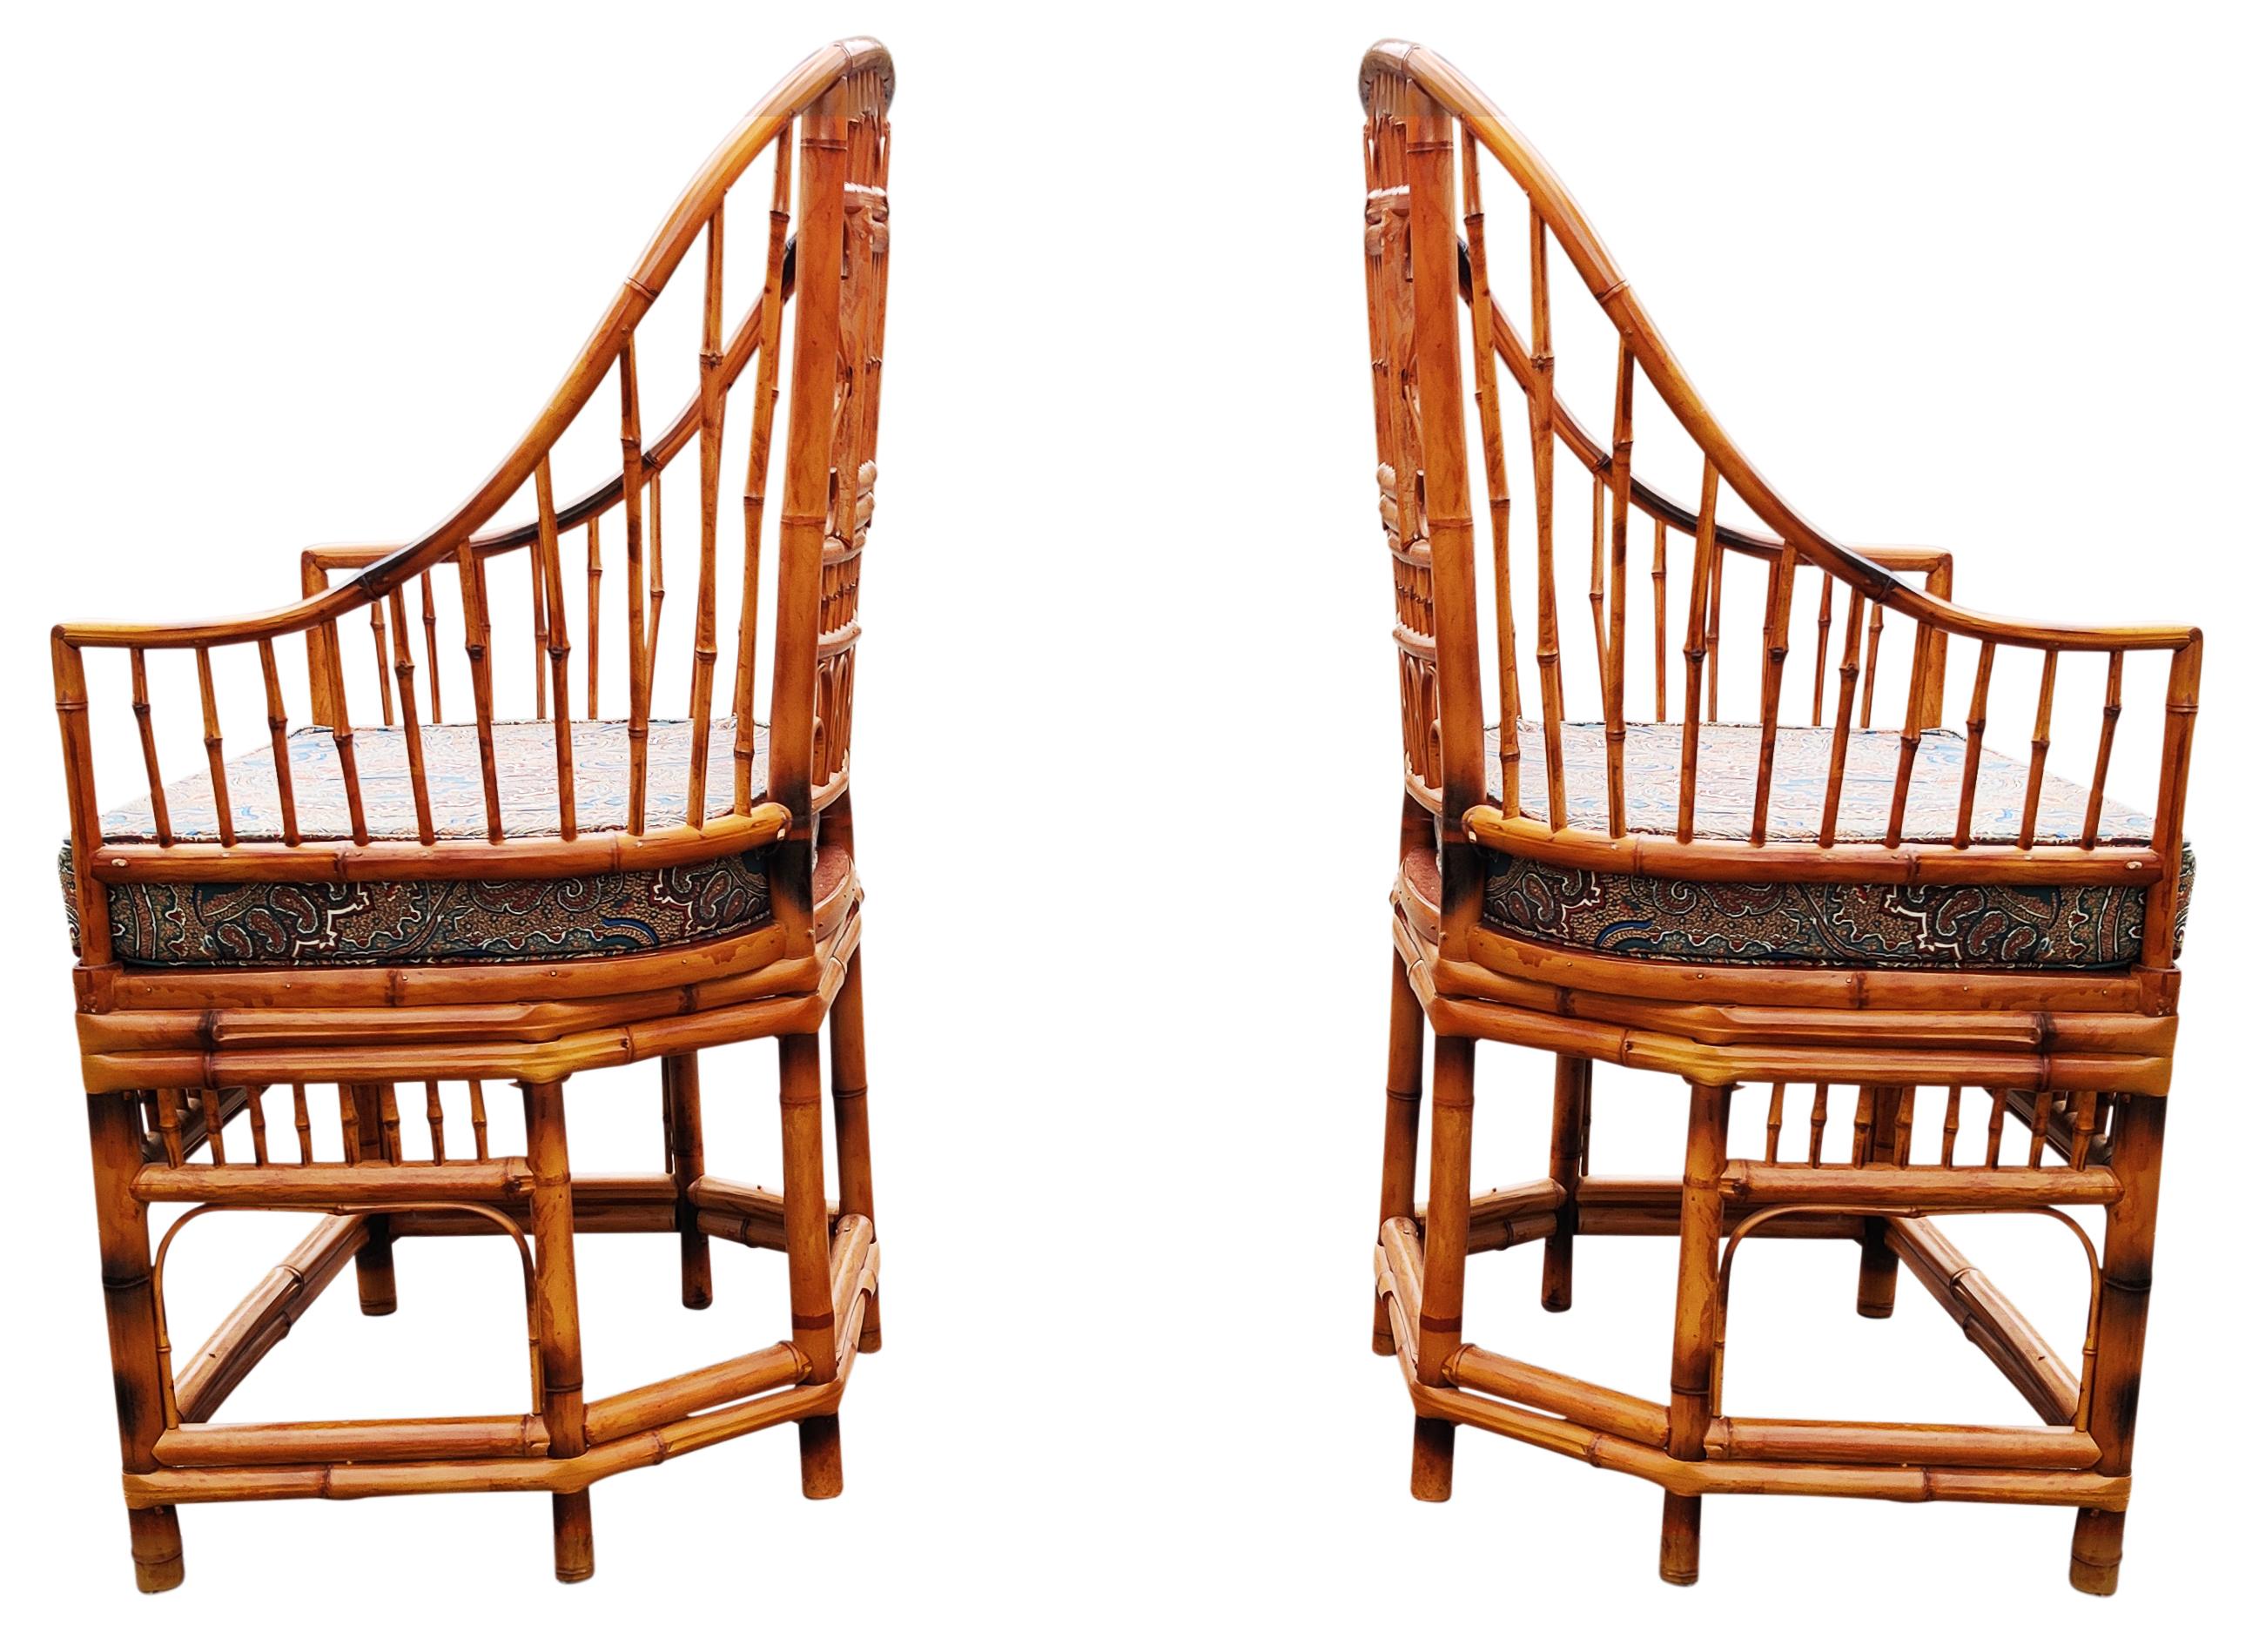 Chinoiserie English Bamboo Cane Pair Armchairs, Manner of Brighton Pavilion 1